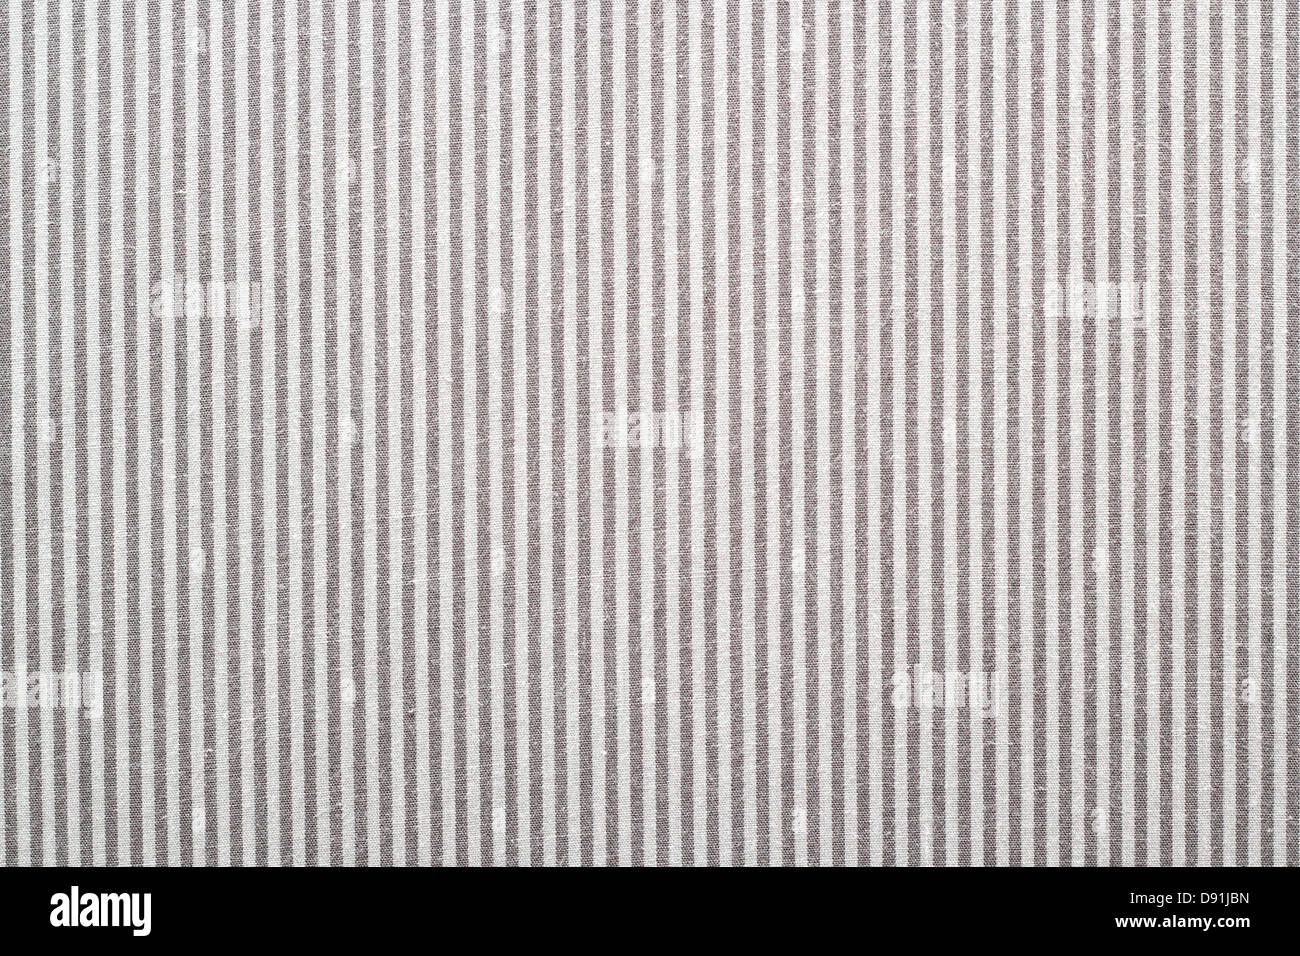 textured shirt material - fabric with gray and white parallel stripes Stock Photo